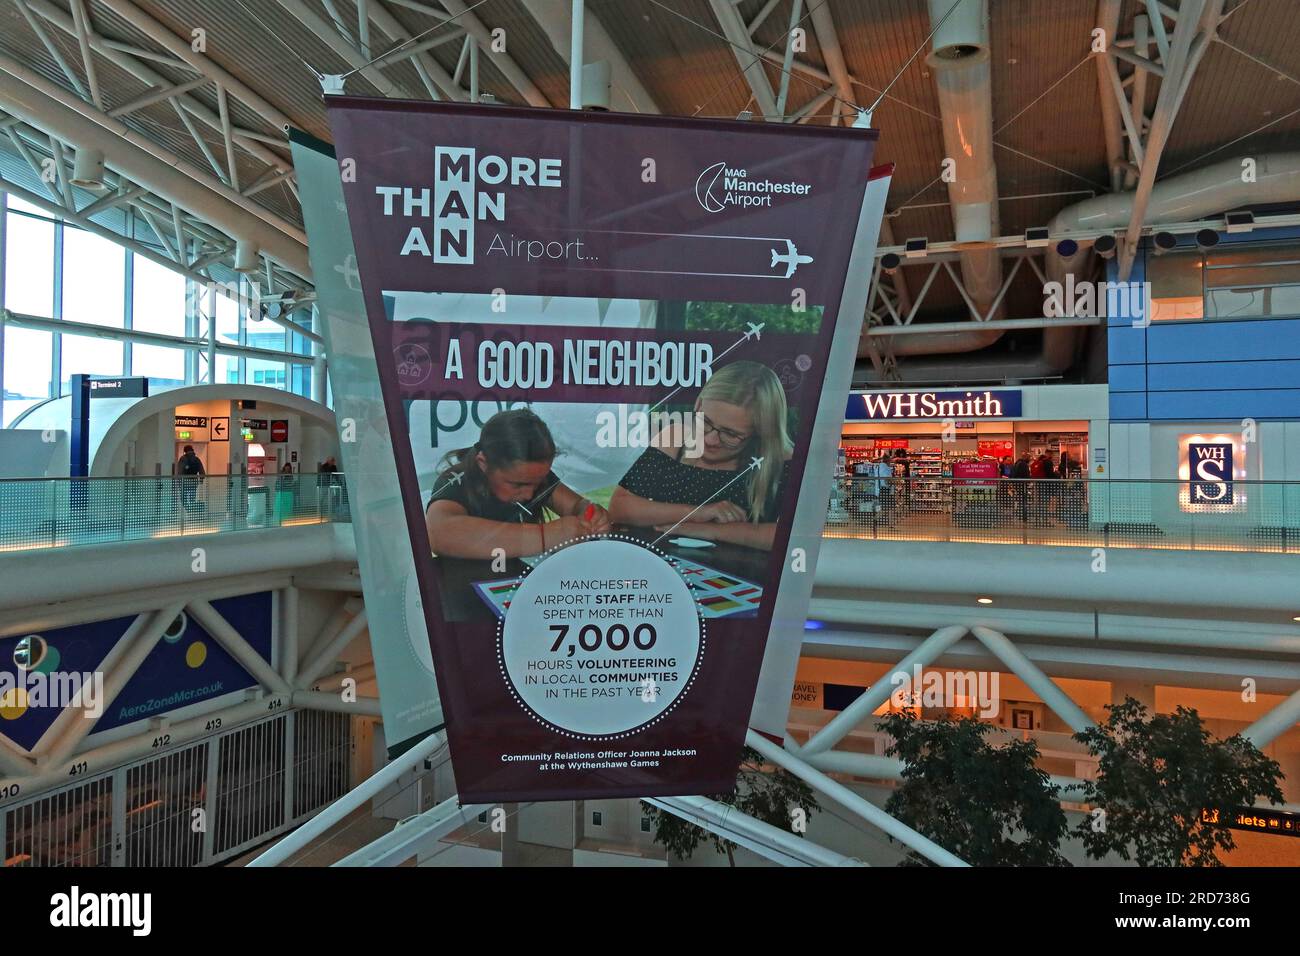 Manchester Airport, being a good neighbour messaging, Manchester Airport, Ringway, England, UK, M90 1QX Stock Photo